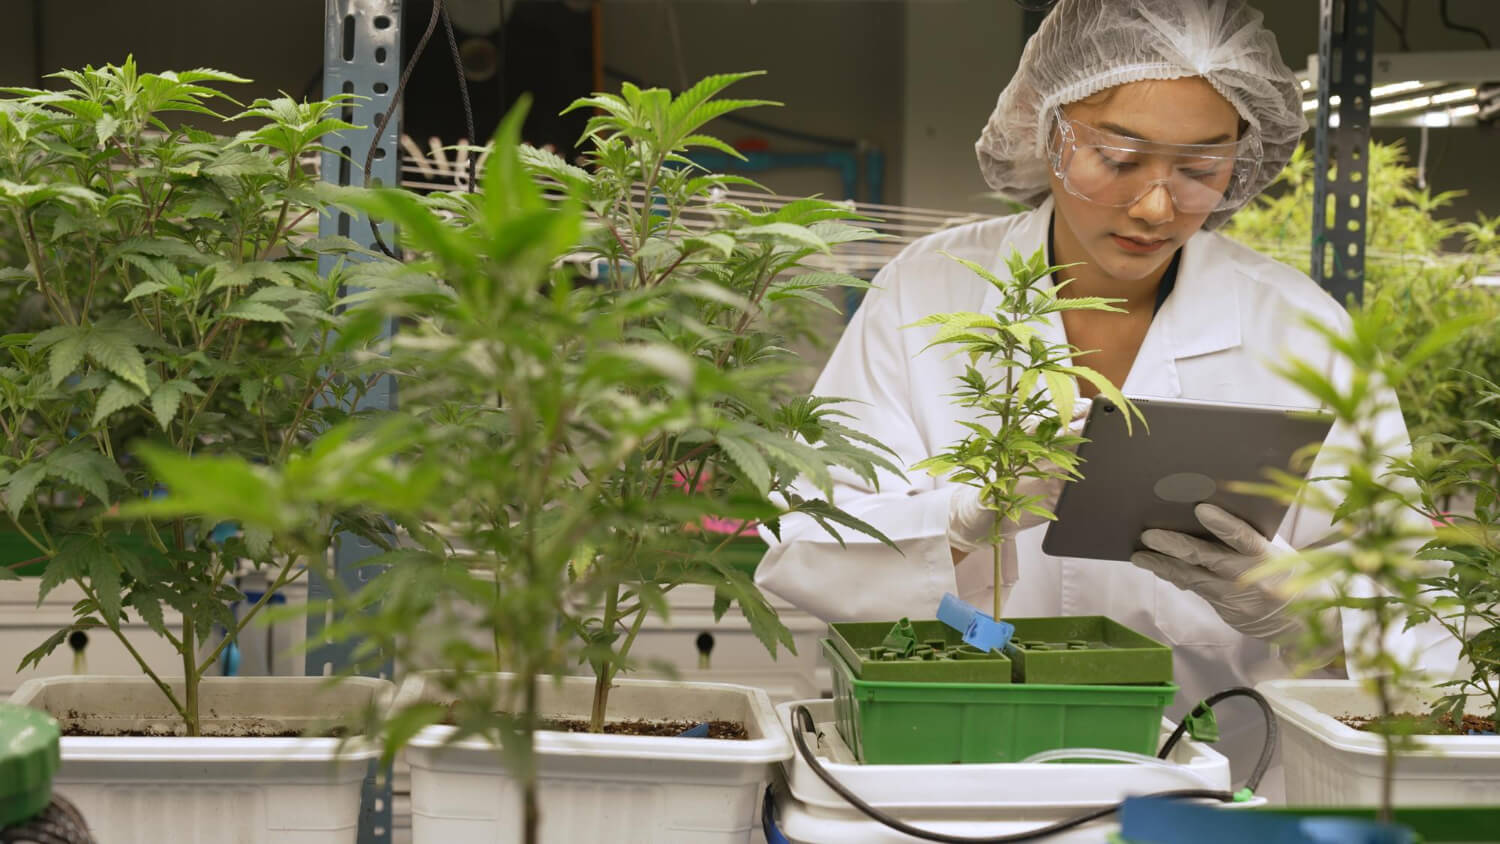 Fewer jobs available in the cannabis industry make it harder for newcomers